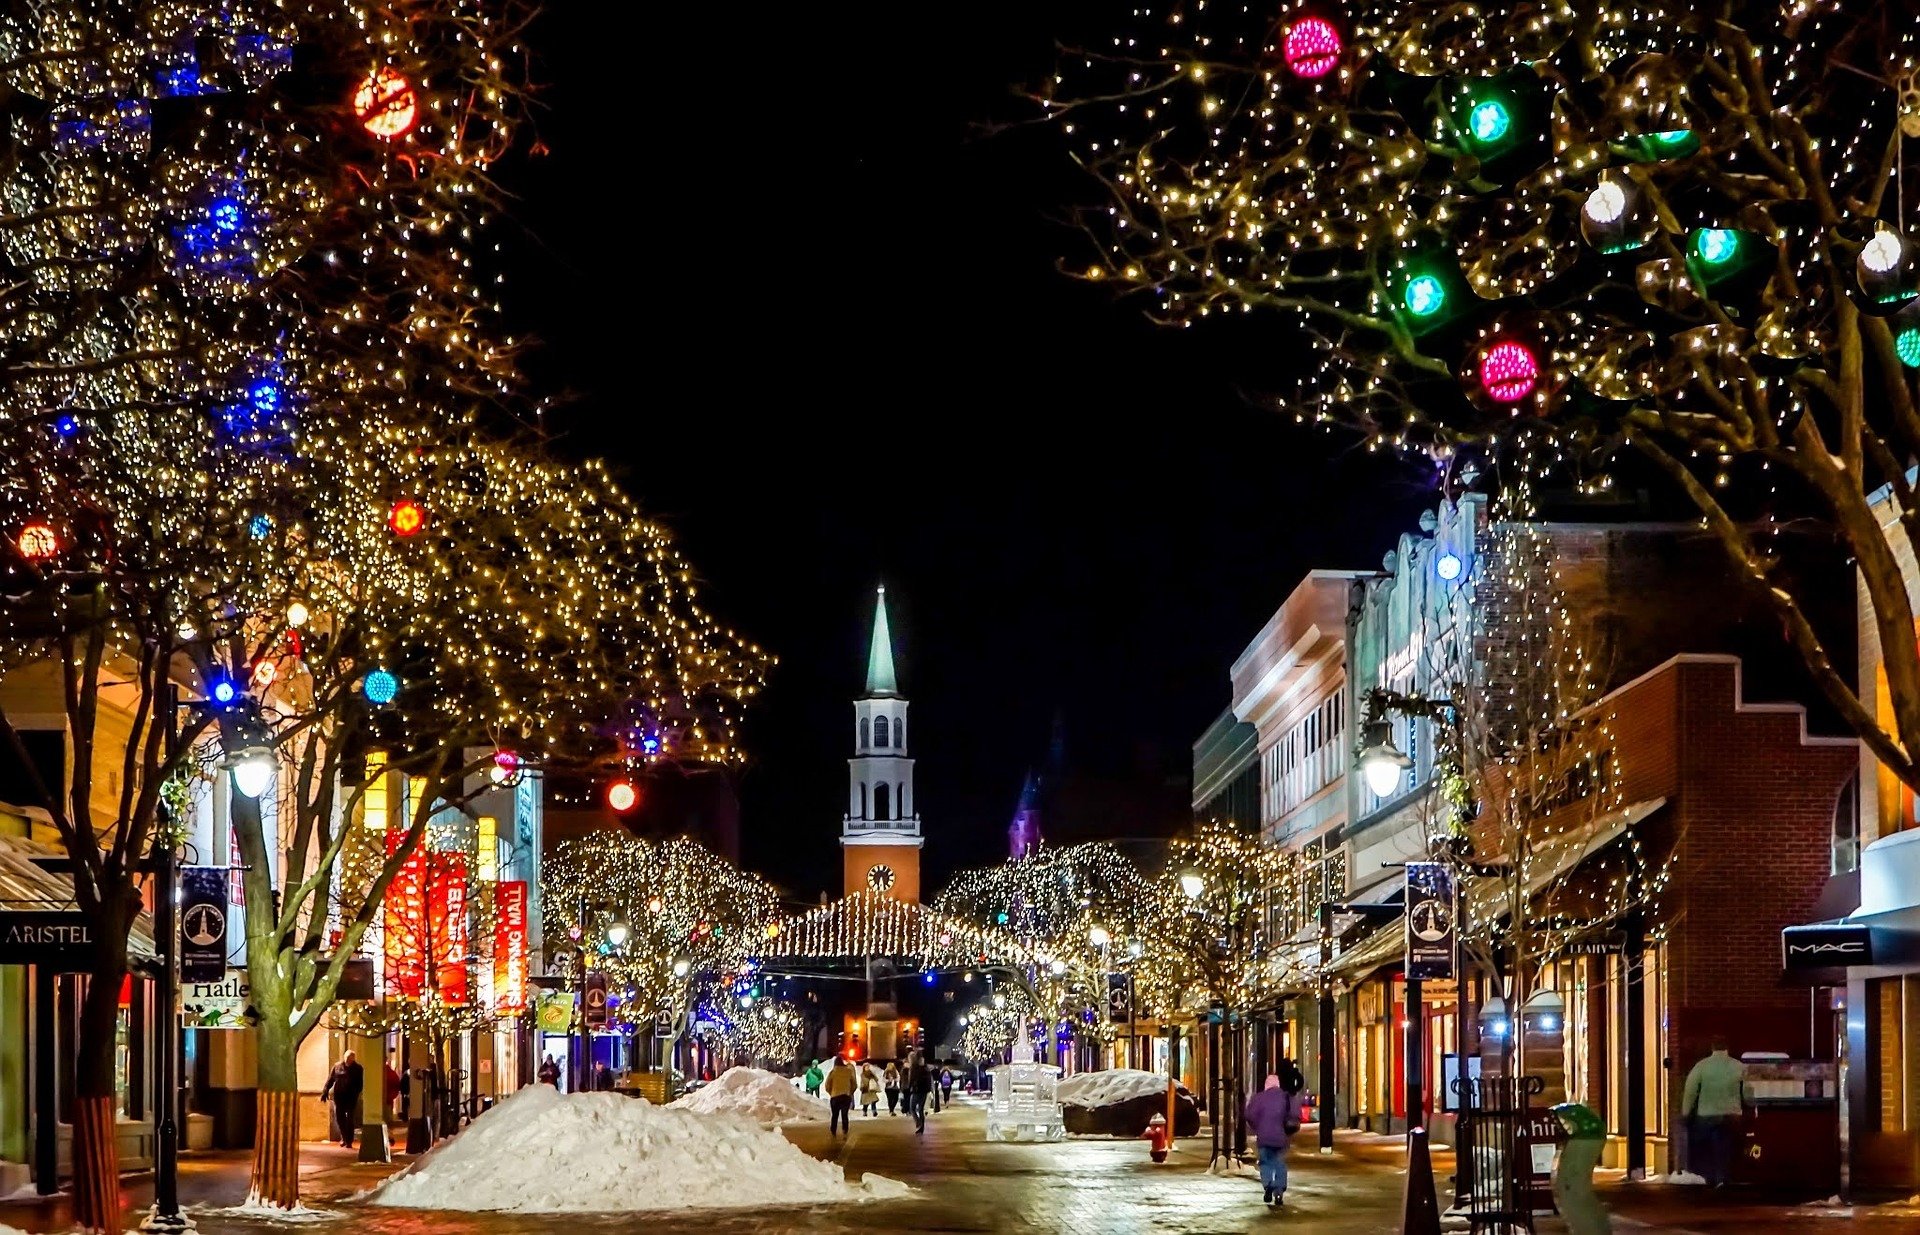 Top 10 places to spend Christmas in America